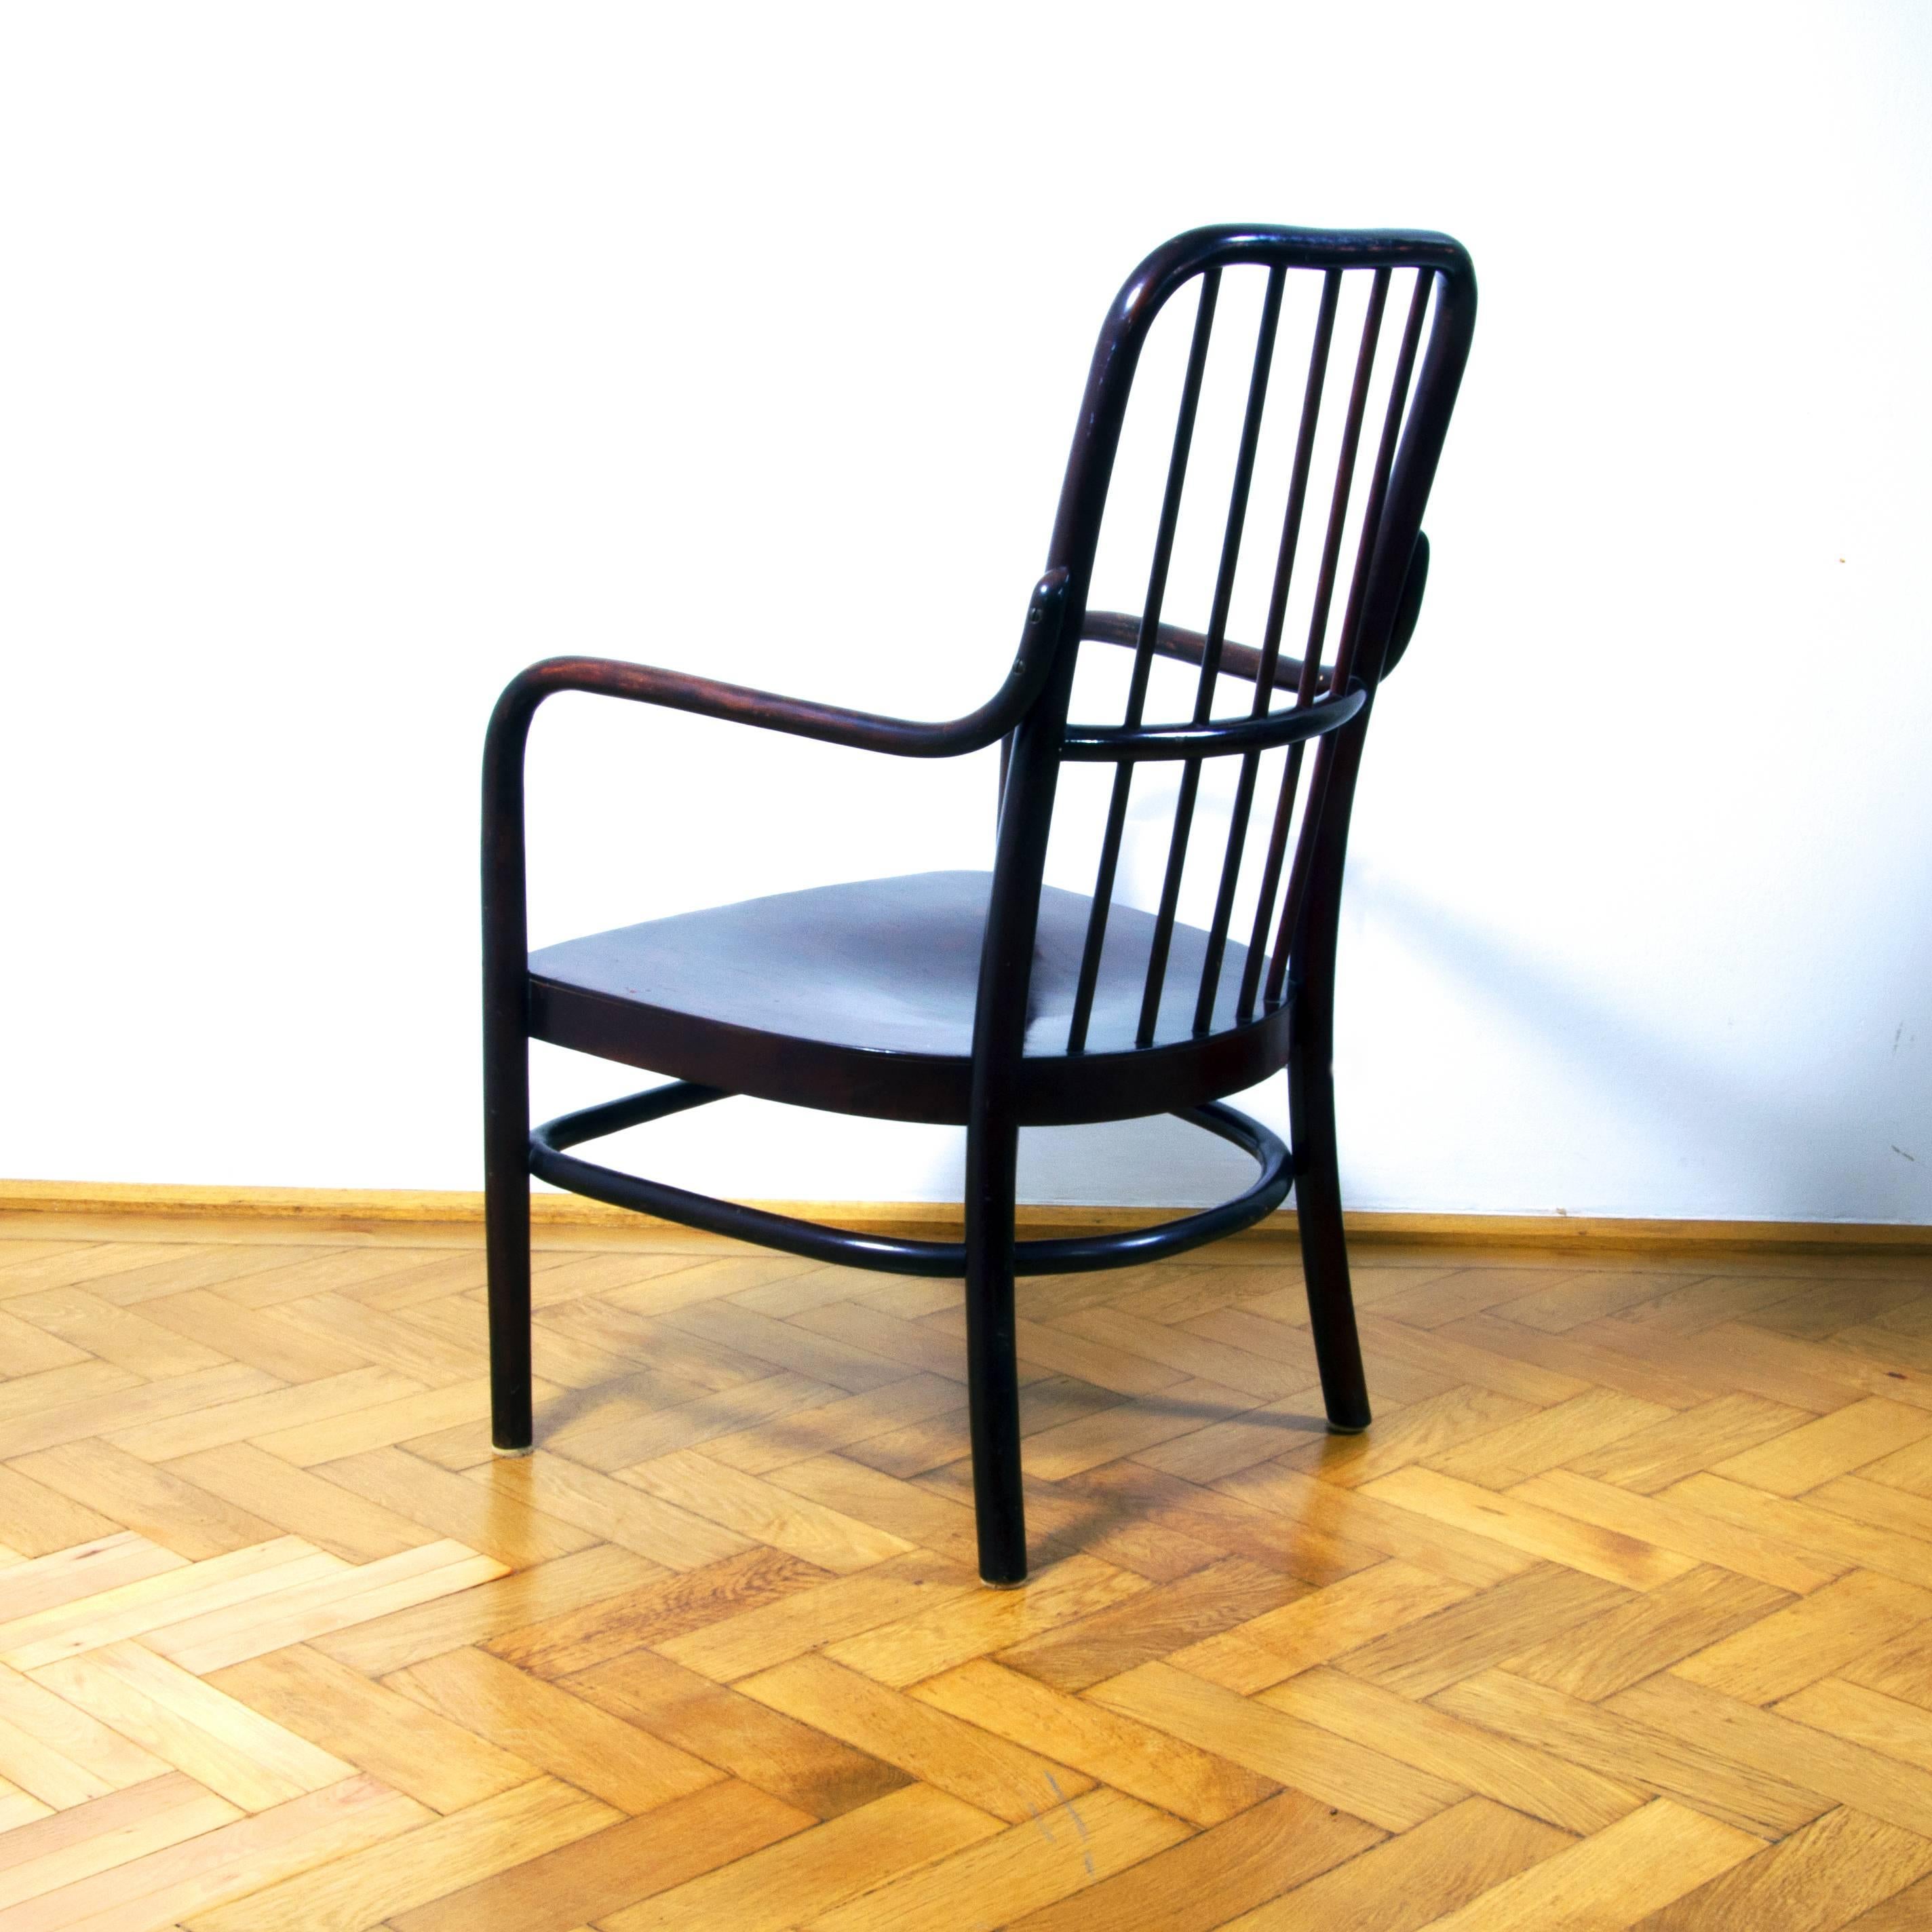 Early 20th Century Thonet No. A63/F by Josef Frank Bentwood Lounge or Low Armchair Art Deco For Sale